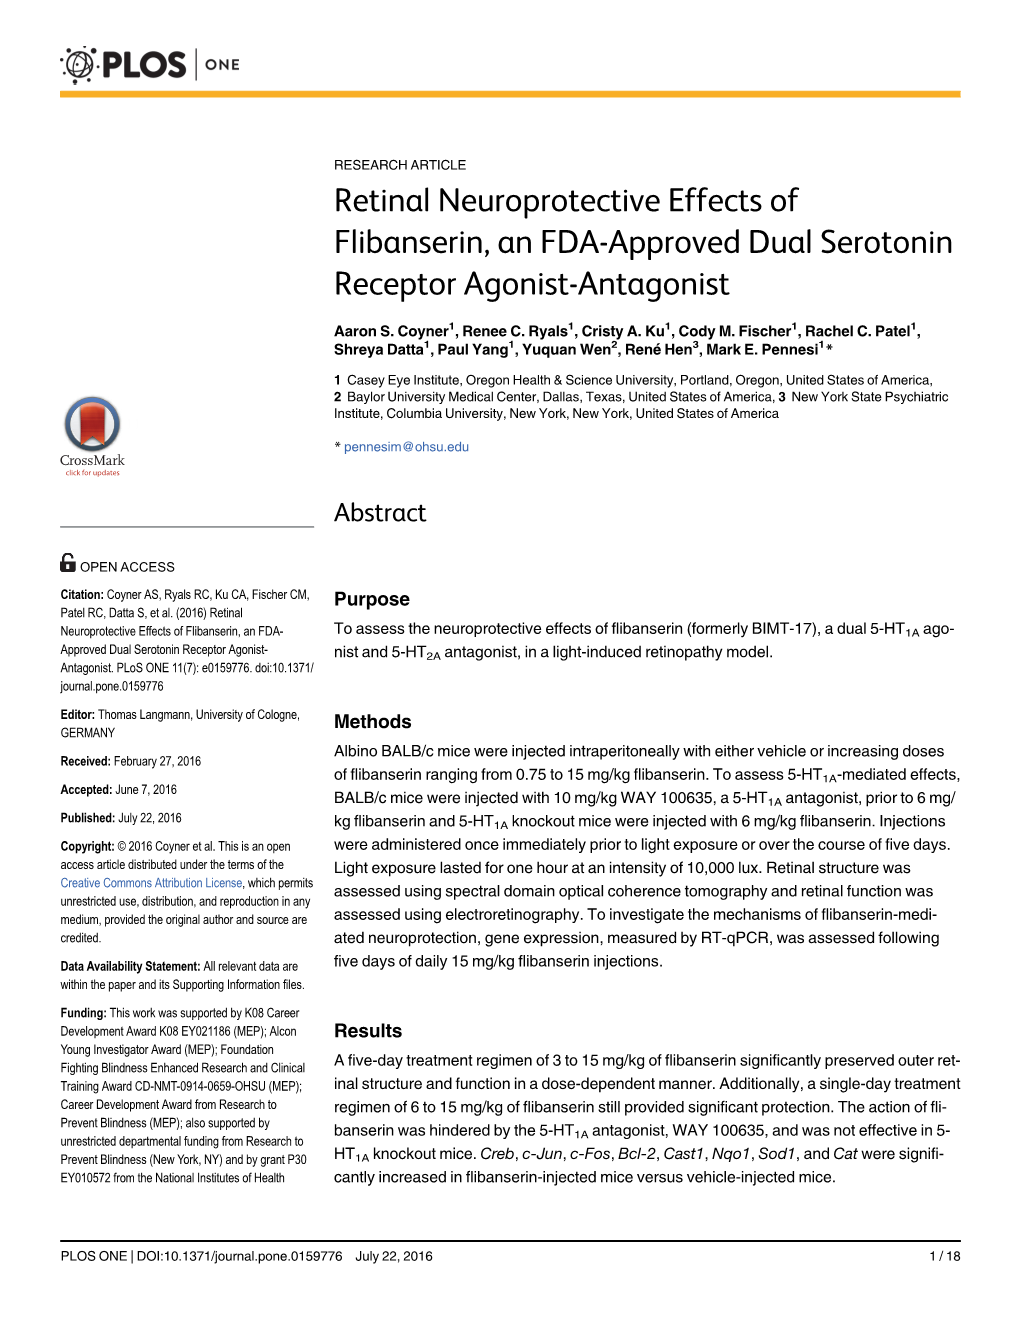 Retinal Neuroprotective Effects of Flibanserin, an FDA-Approved Dual Serotonin Receptor Agonist-Antagonist